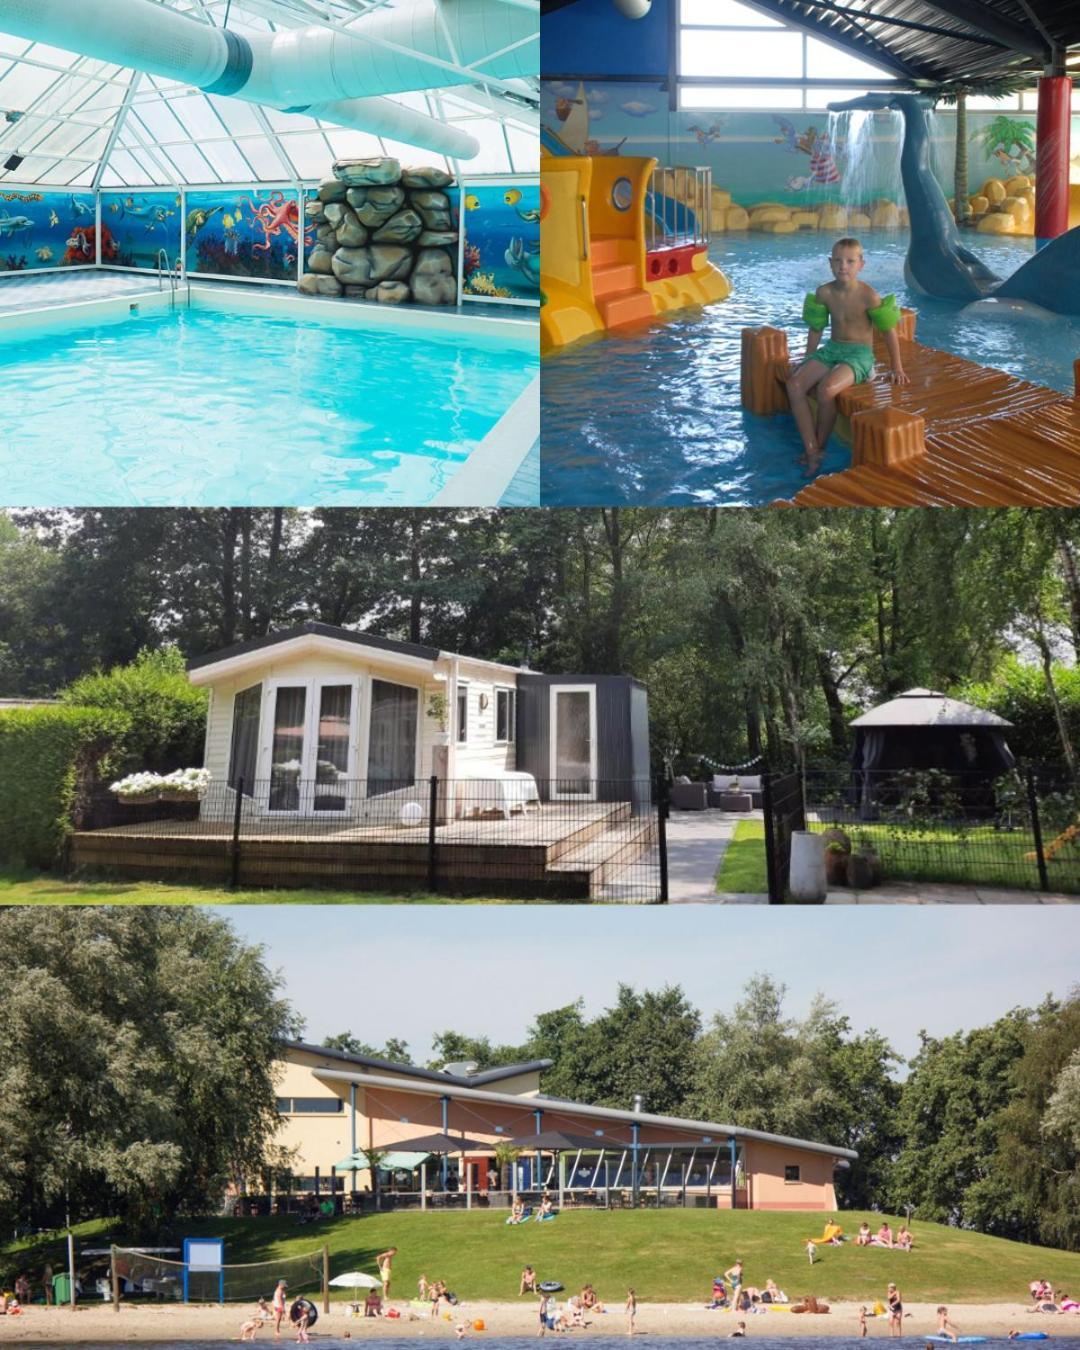 Vakantienoord, Chalet 6P With Veranda, Located In Friesland, 5 Stars Camping On The Lake Suameer Ngoại thất bức ảnh